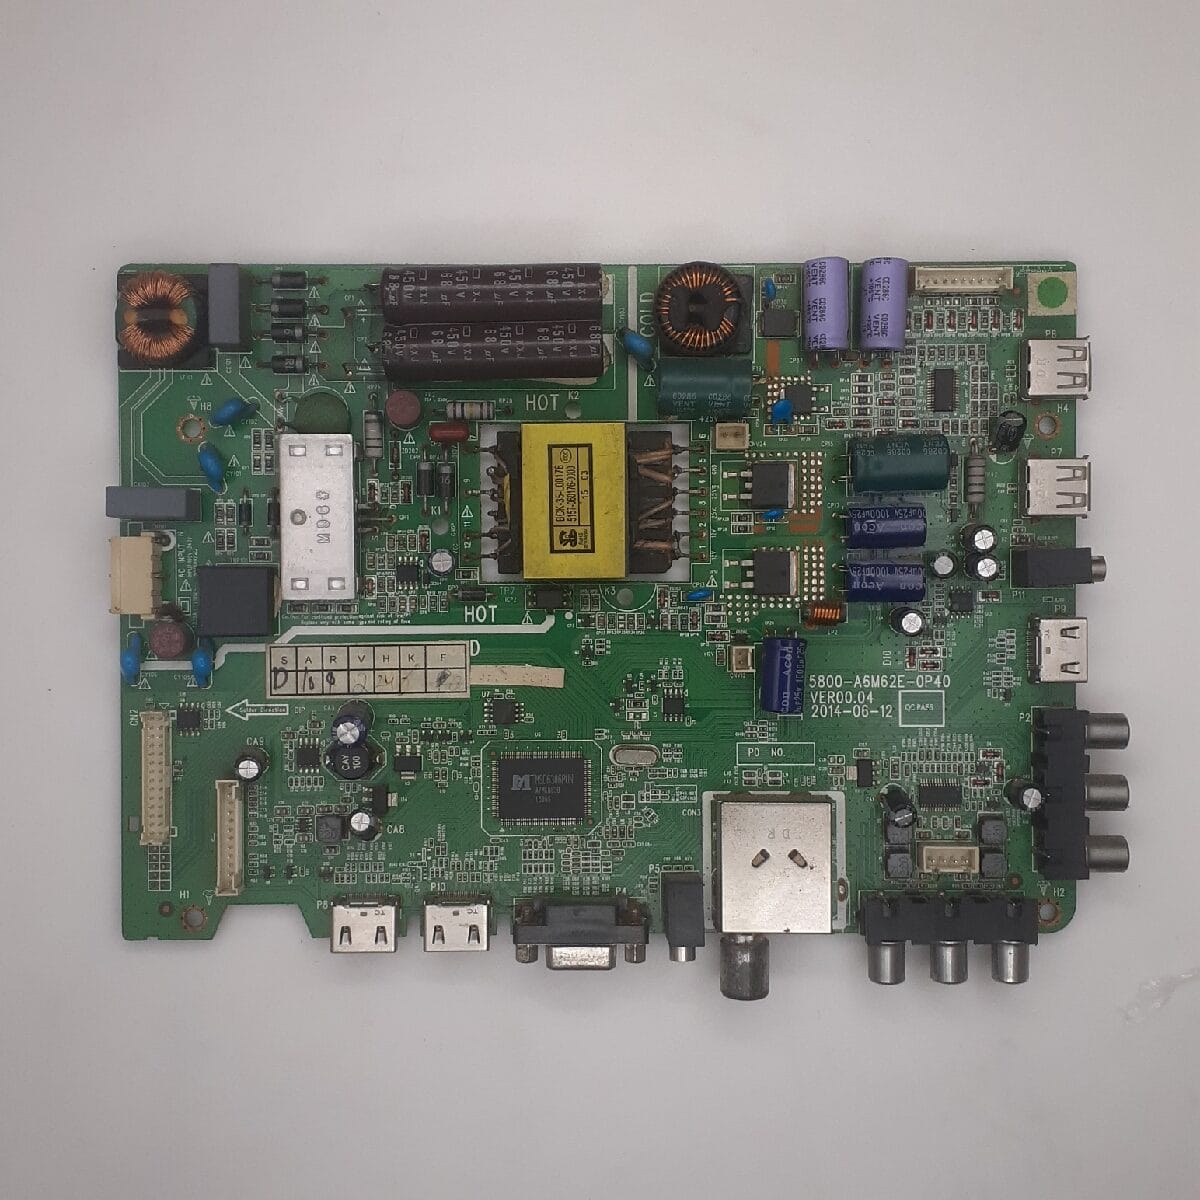 TH-32C403DX PANASONIC MOTHERBOARD FOR LED TV